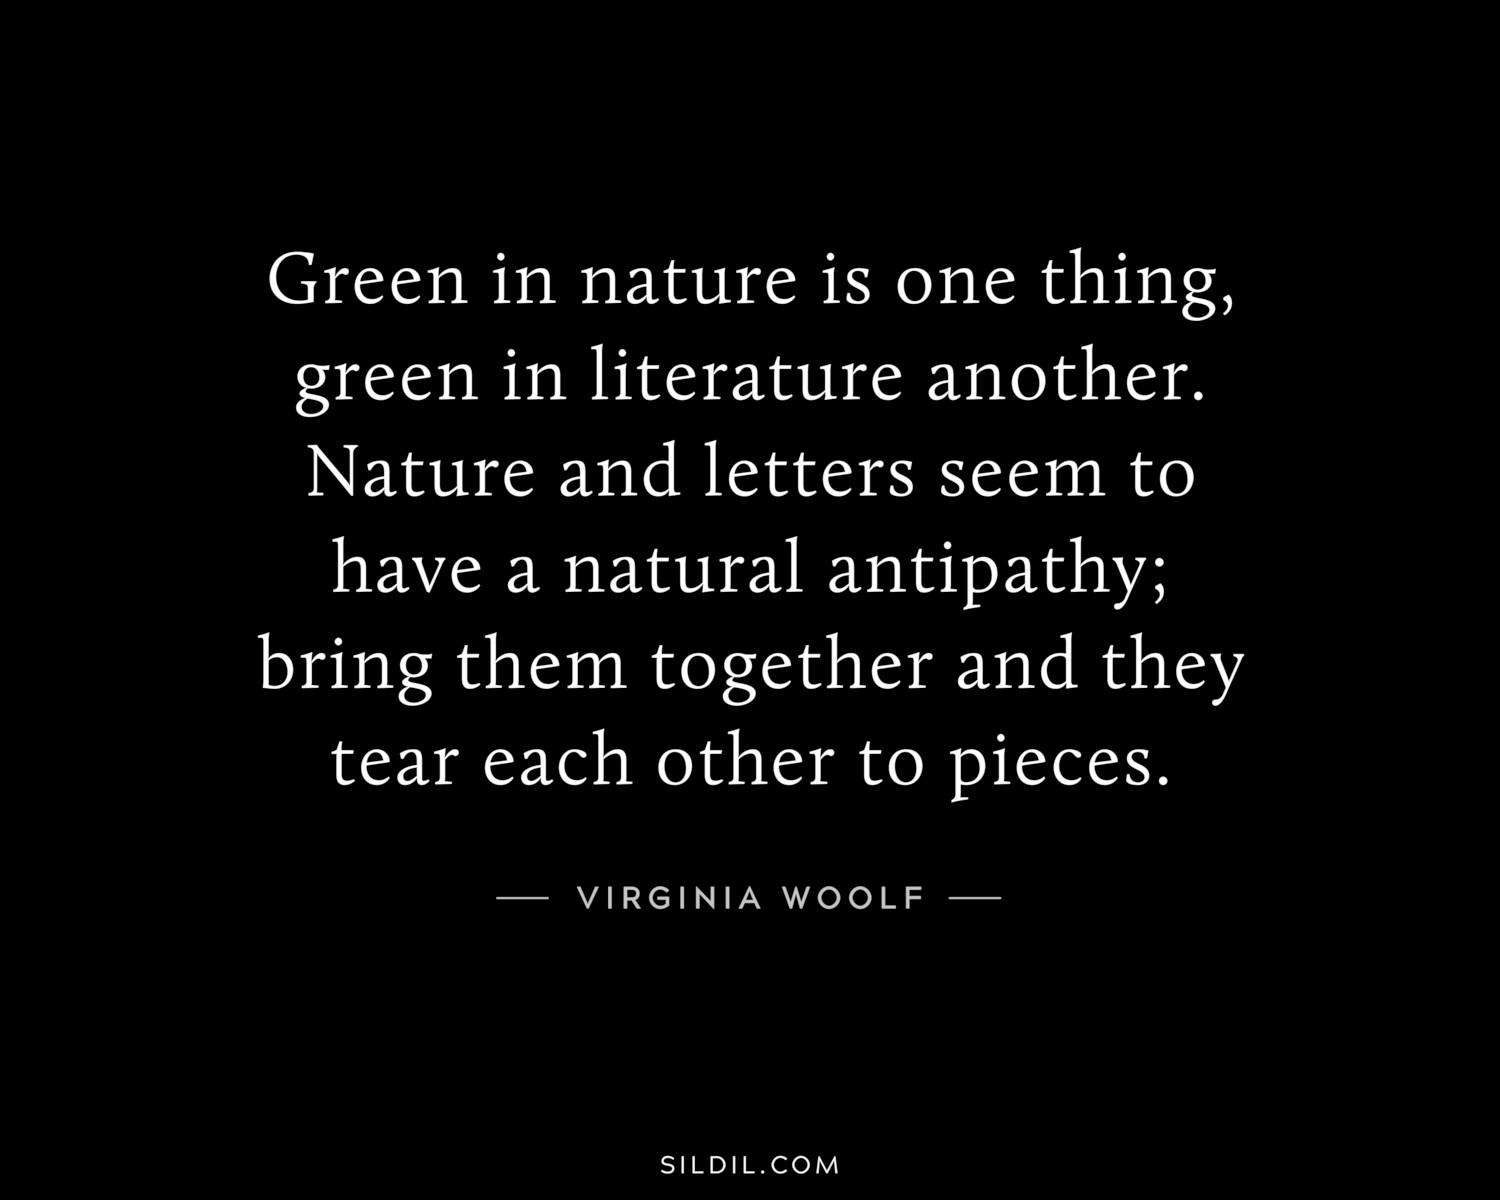 Green in nature is one thing, green in literature another. Nature and letters seem to have a natural antipathy; bring them together and they tear each other to pieces.